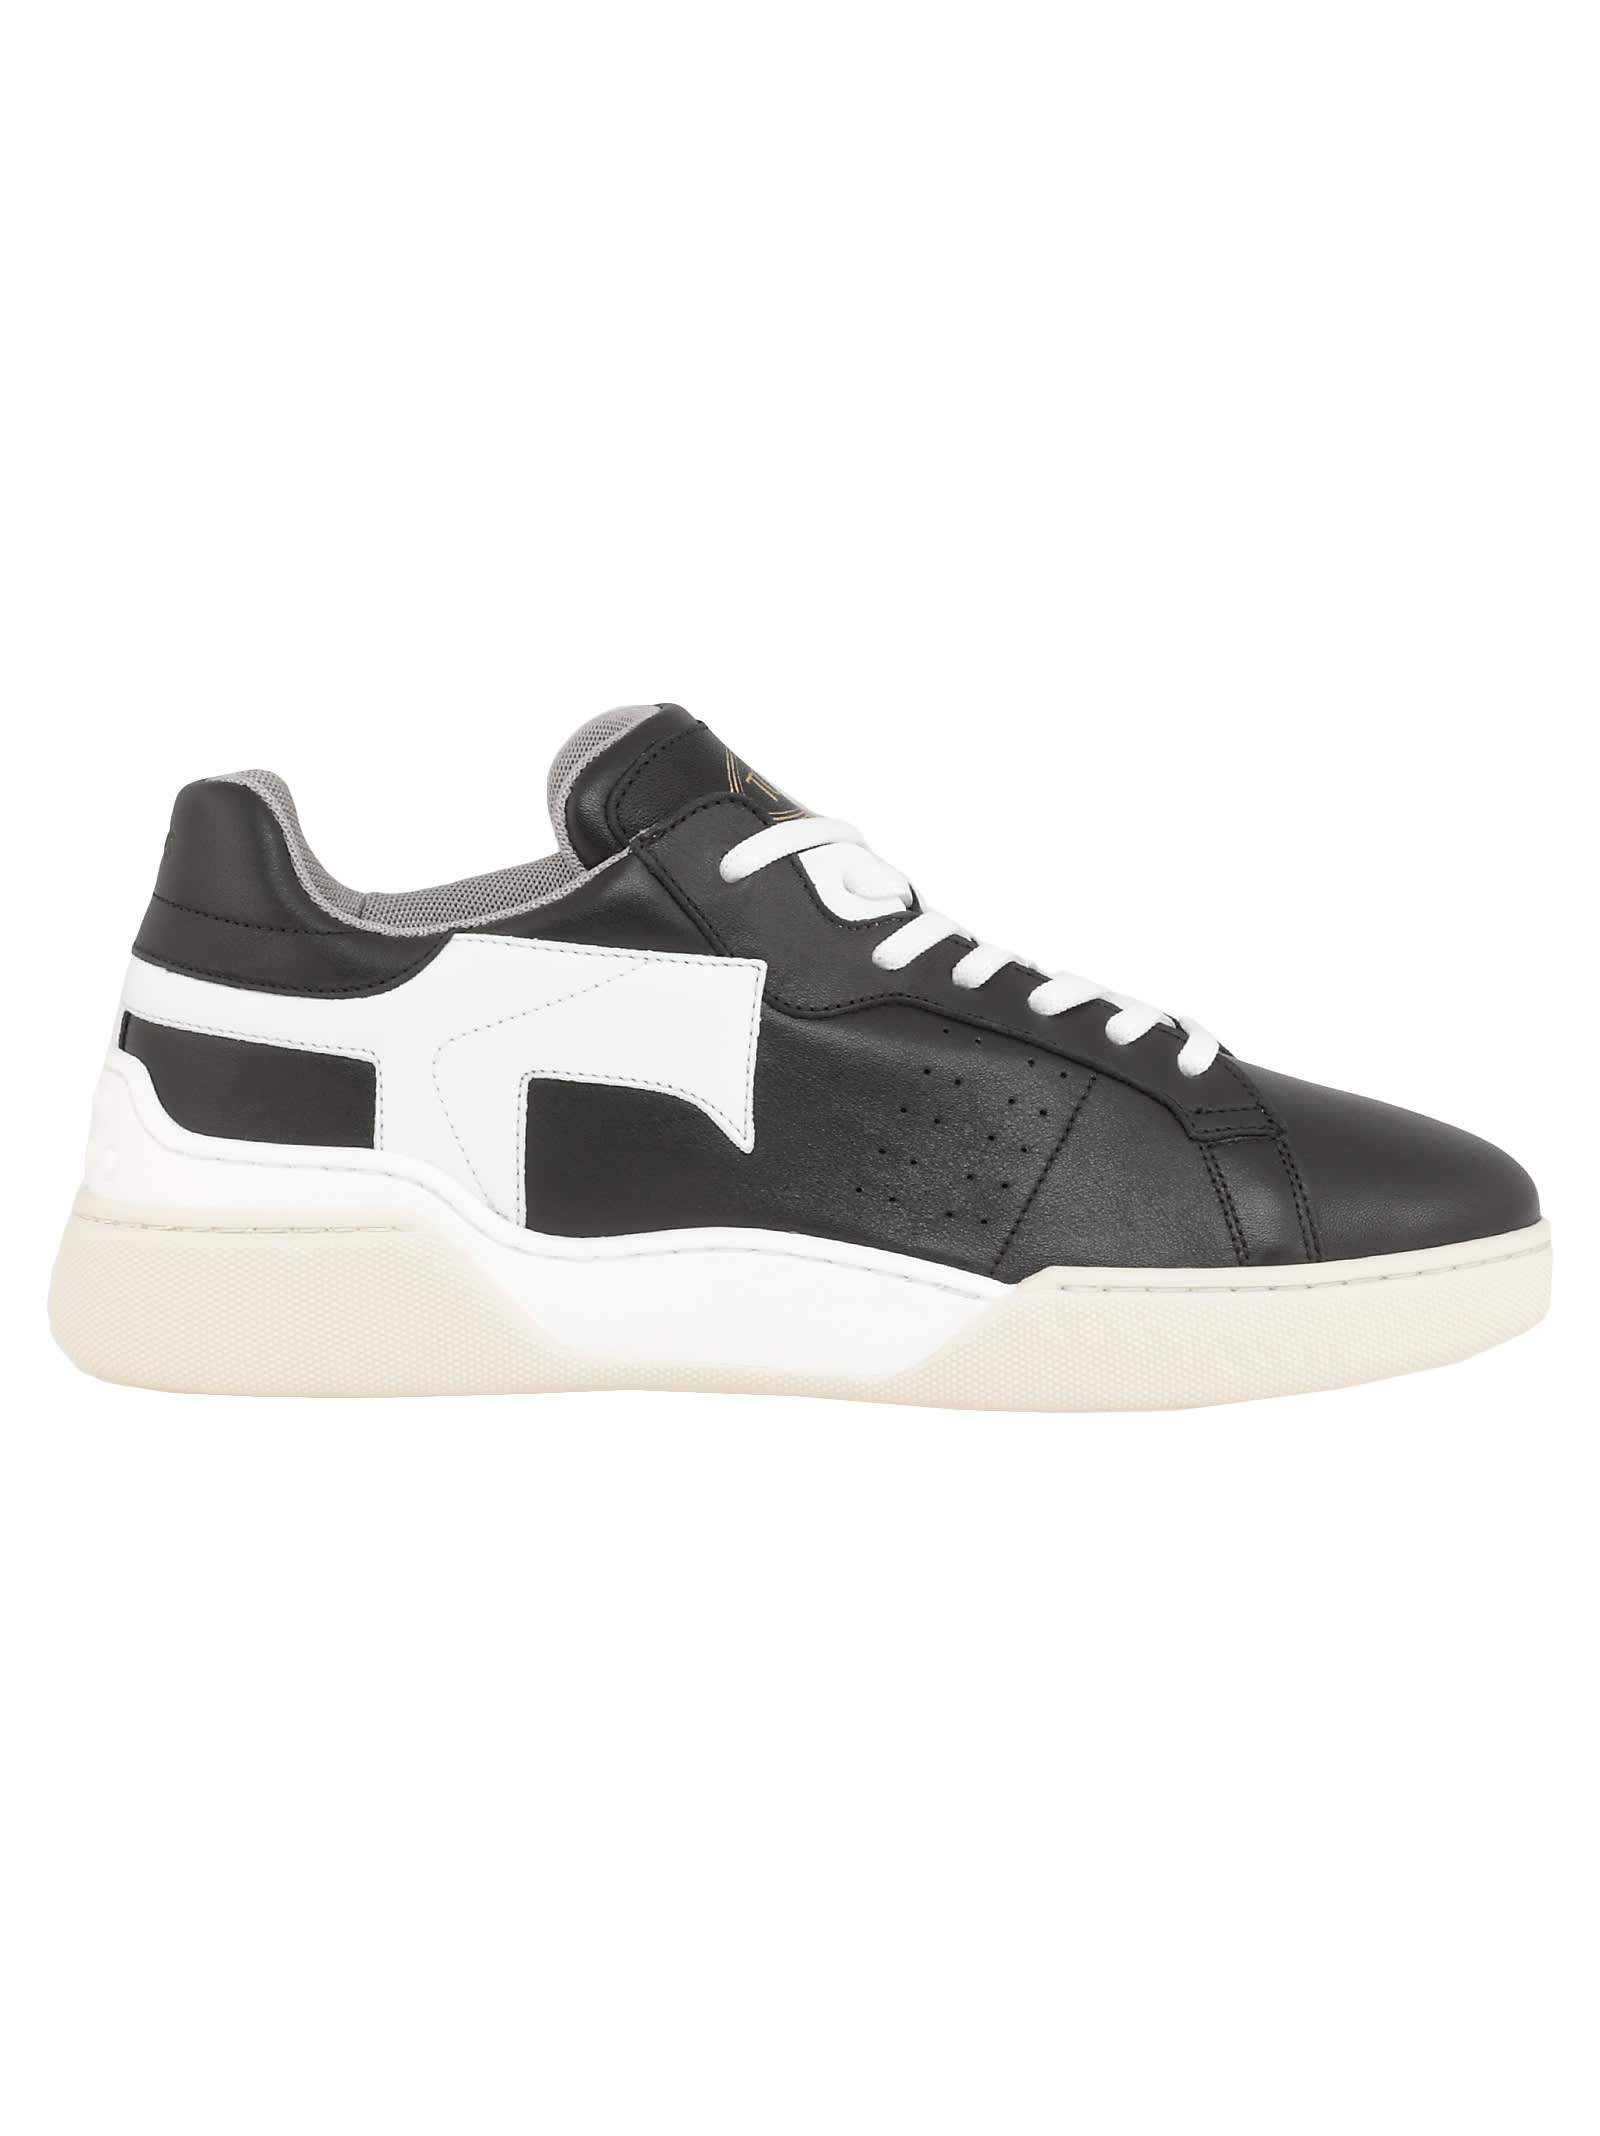 Tods Leather Sneaker